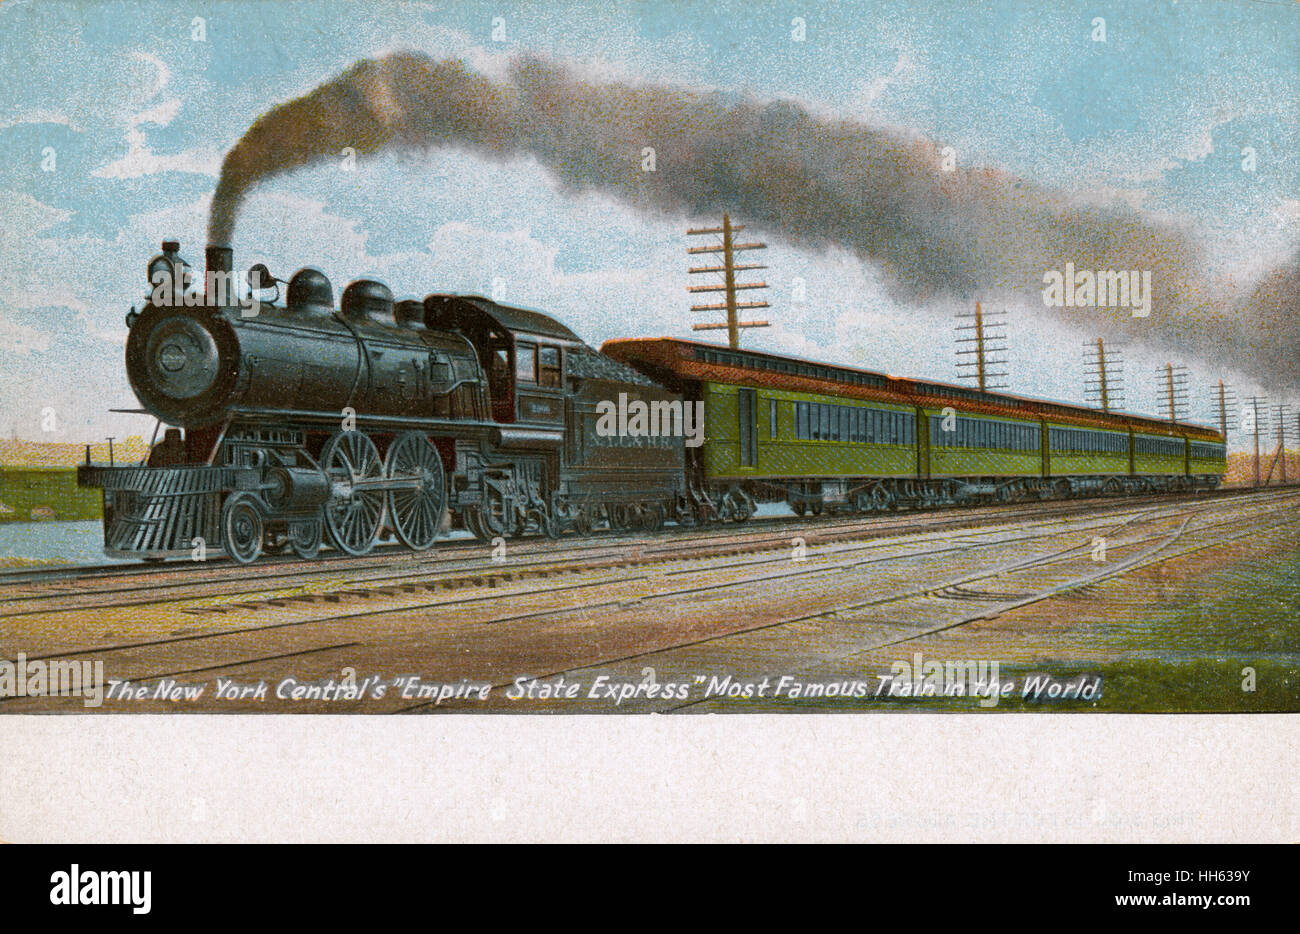 USA - The New York Central's 'Empire State Express' Stock Photo